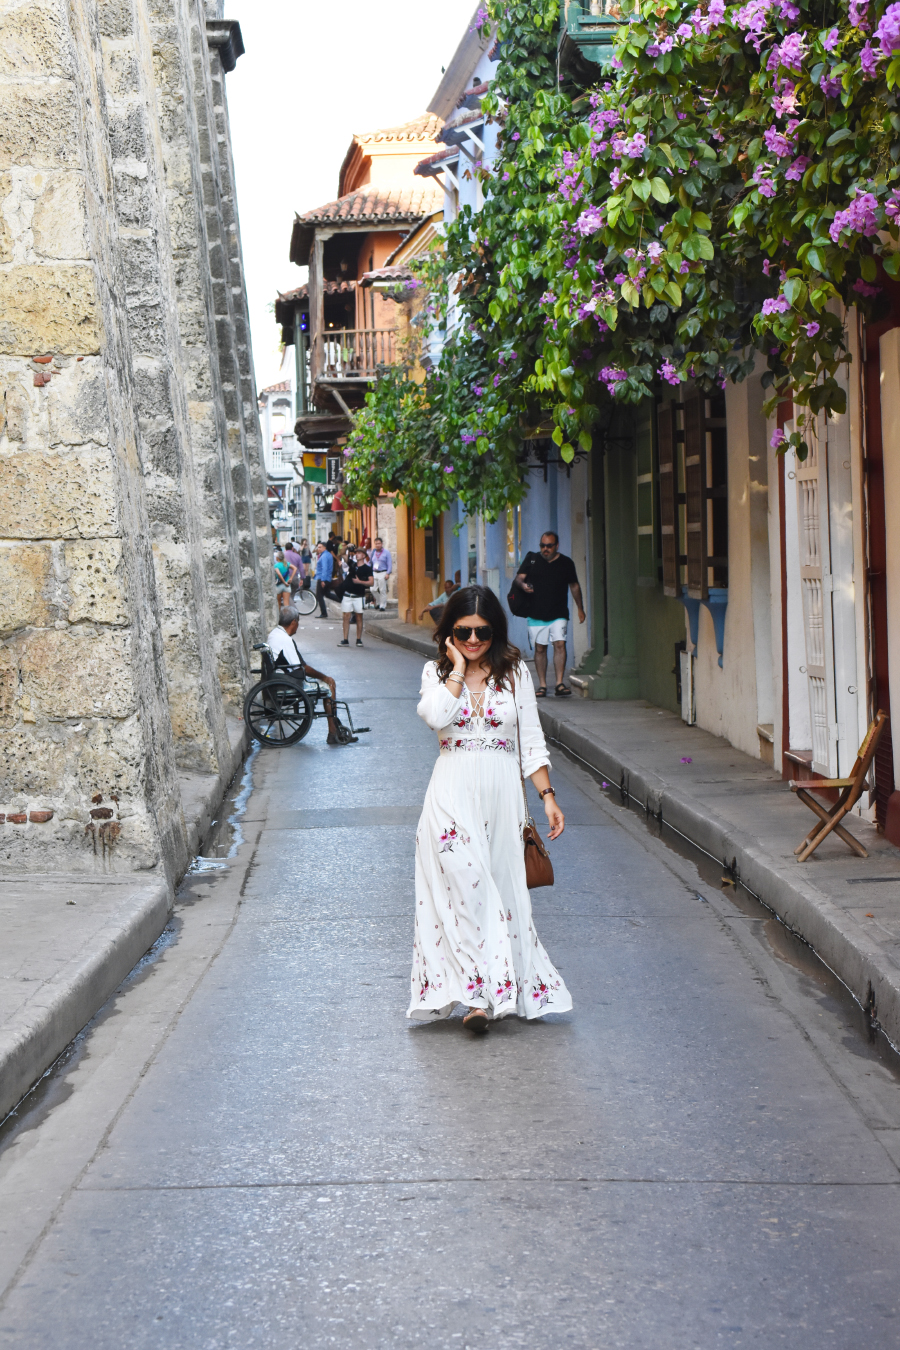 street style in Cartagena Colombia - CARTAGENA STREET STYLE featured by popular Denver fashion blogger Chic Talk